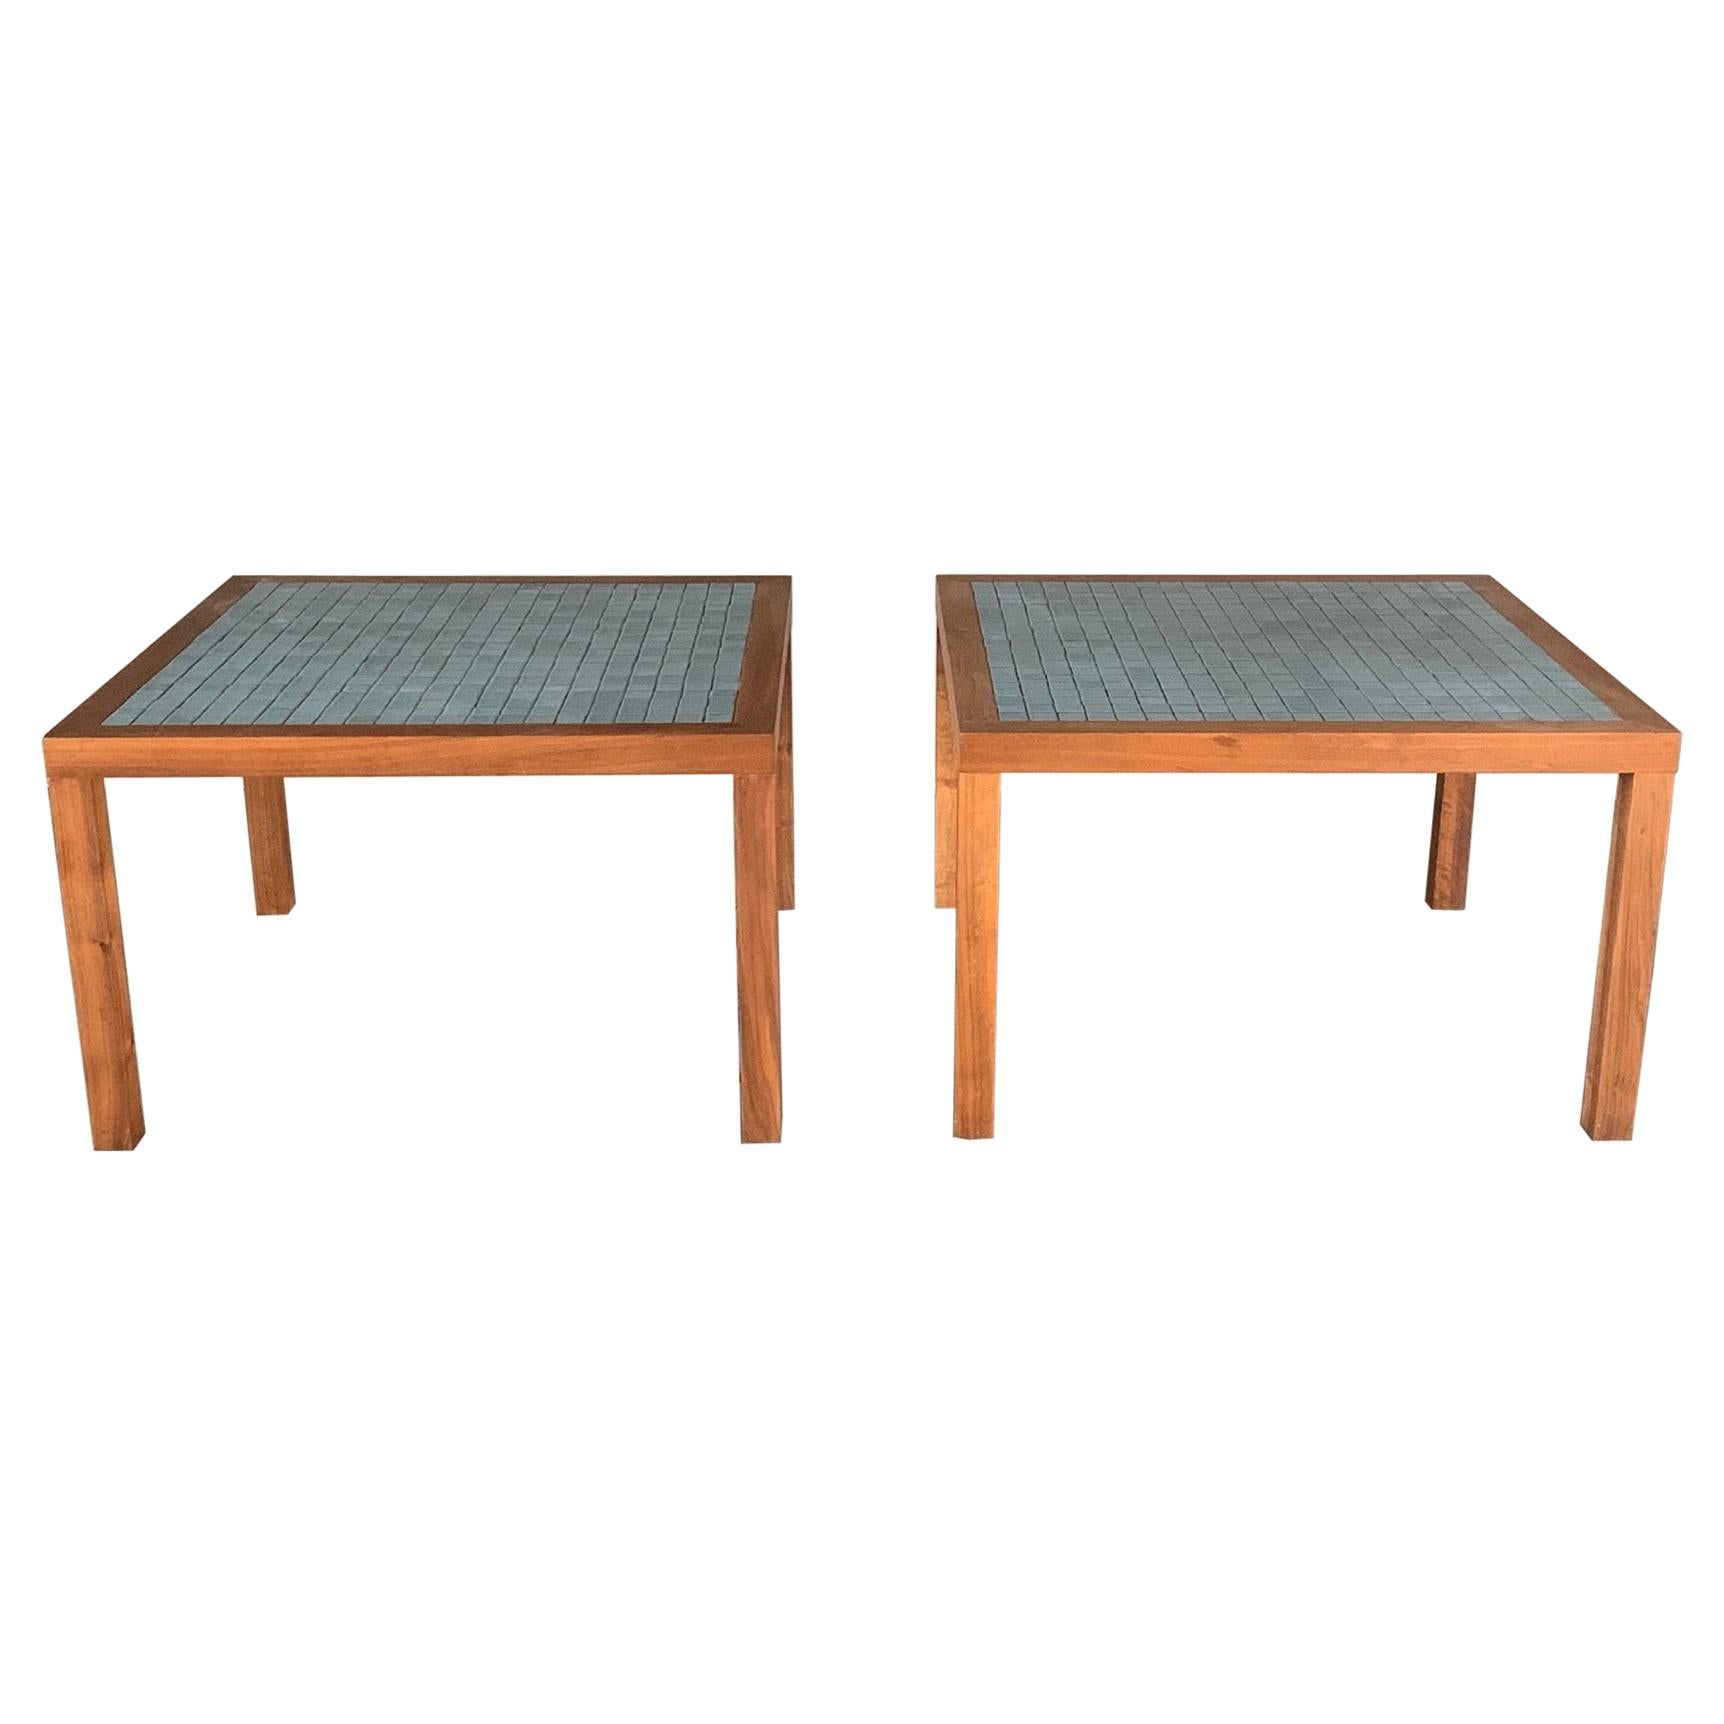 Pair of Low Tile Tables by Martz